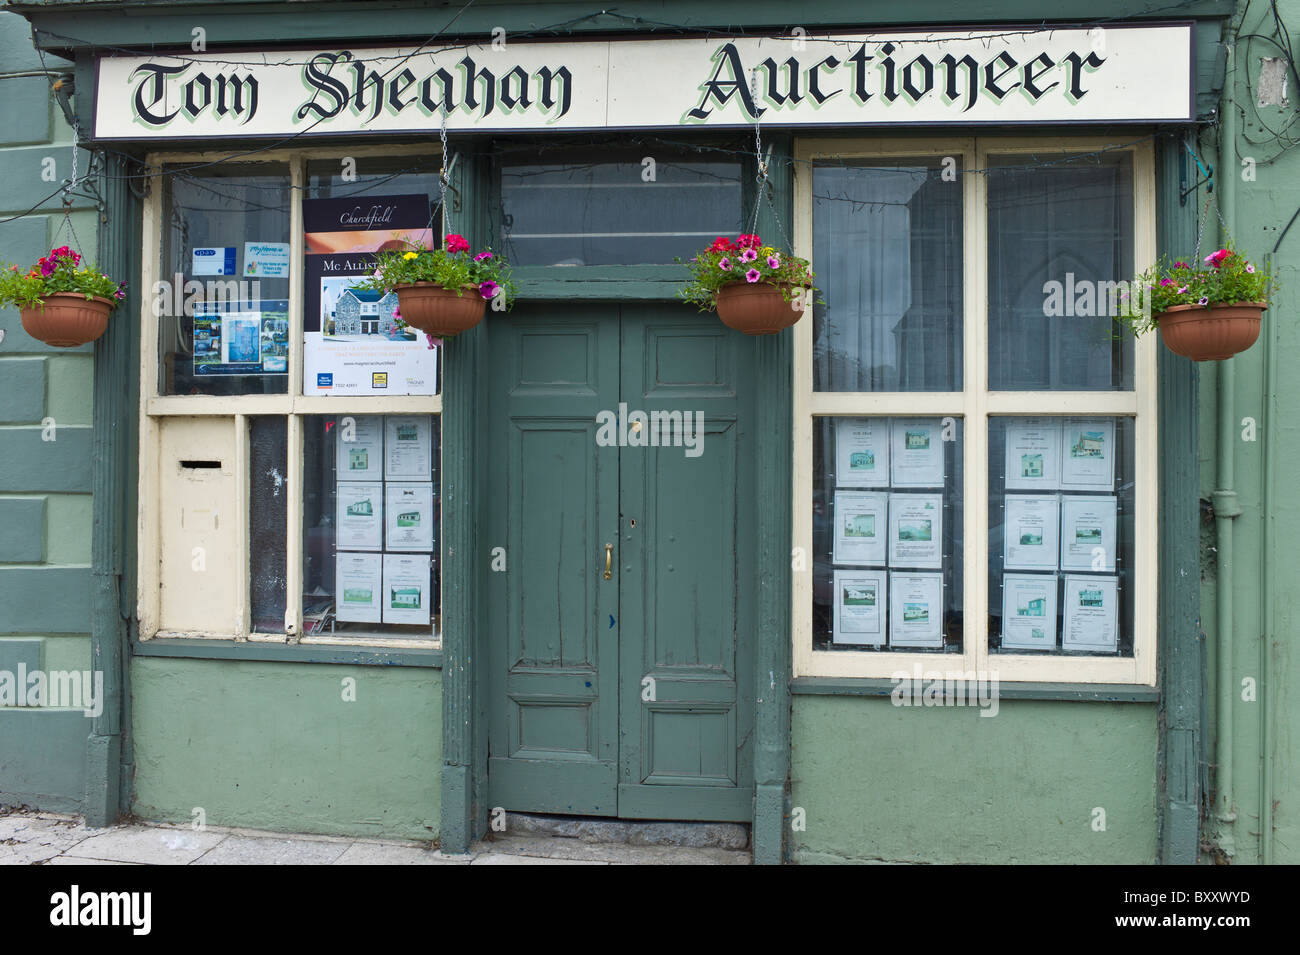 Tom Sheahan Auctioneer in Buttevant, County Cork, Ireland Stock Photo